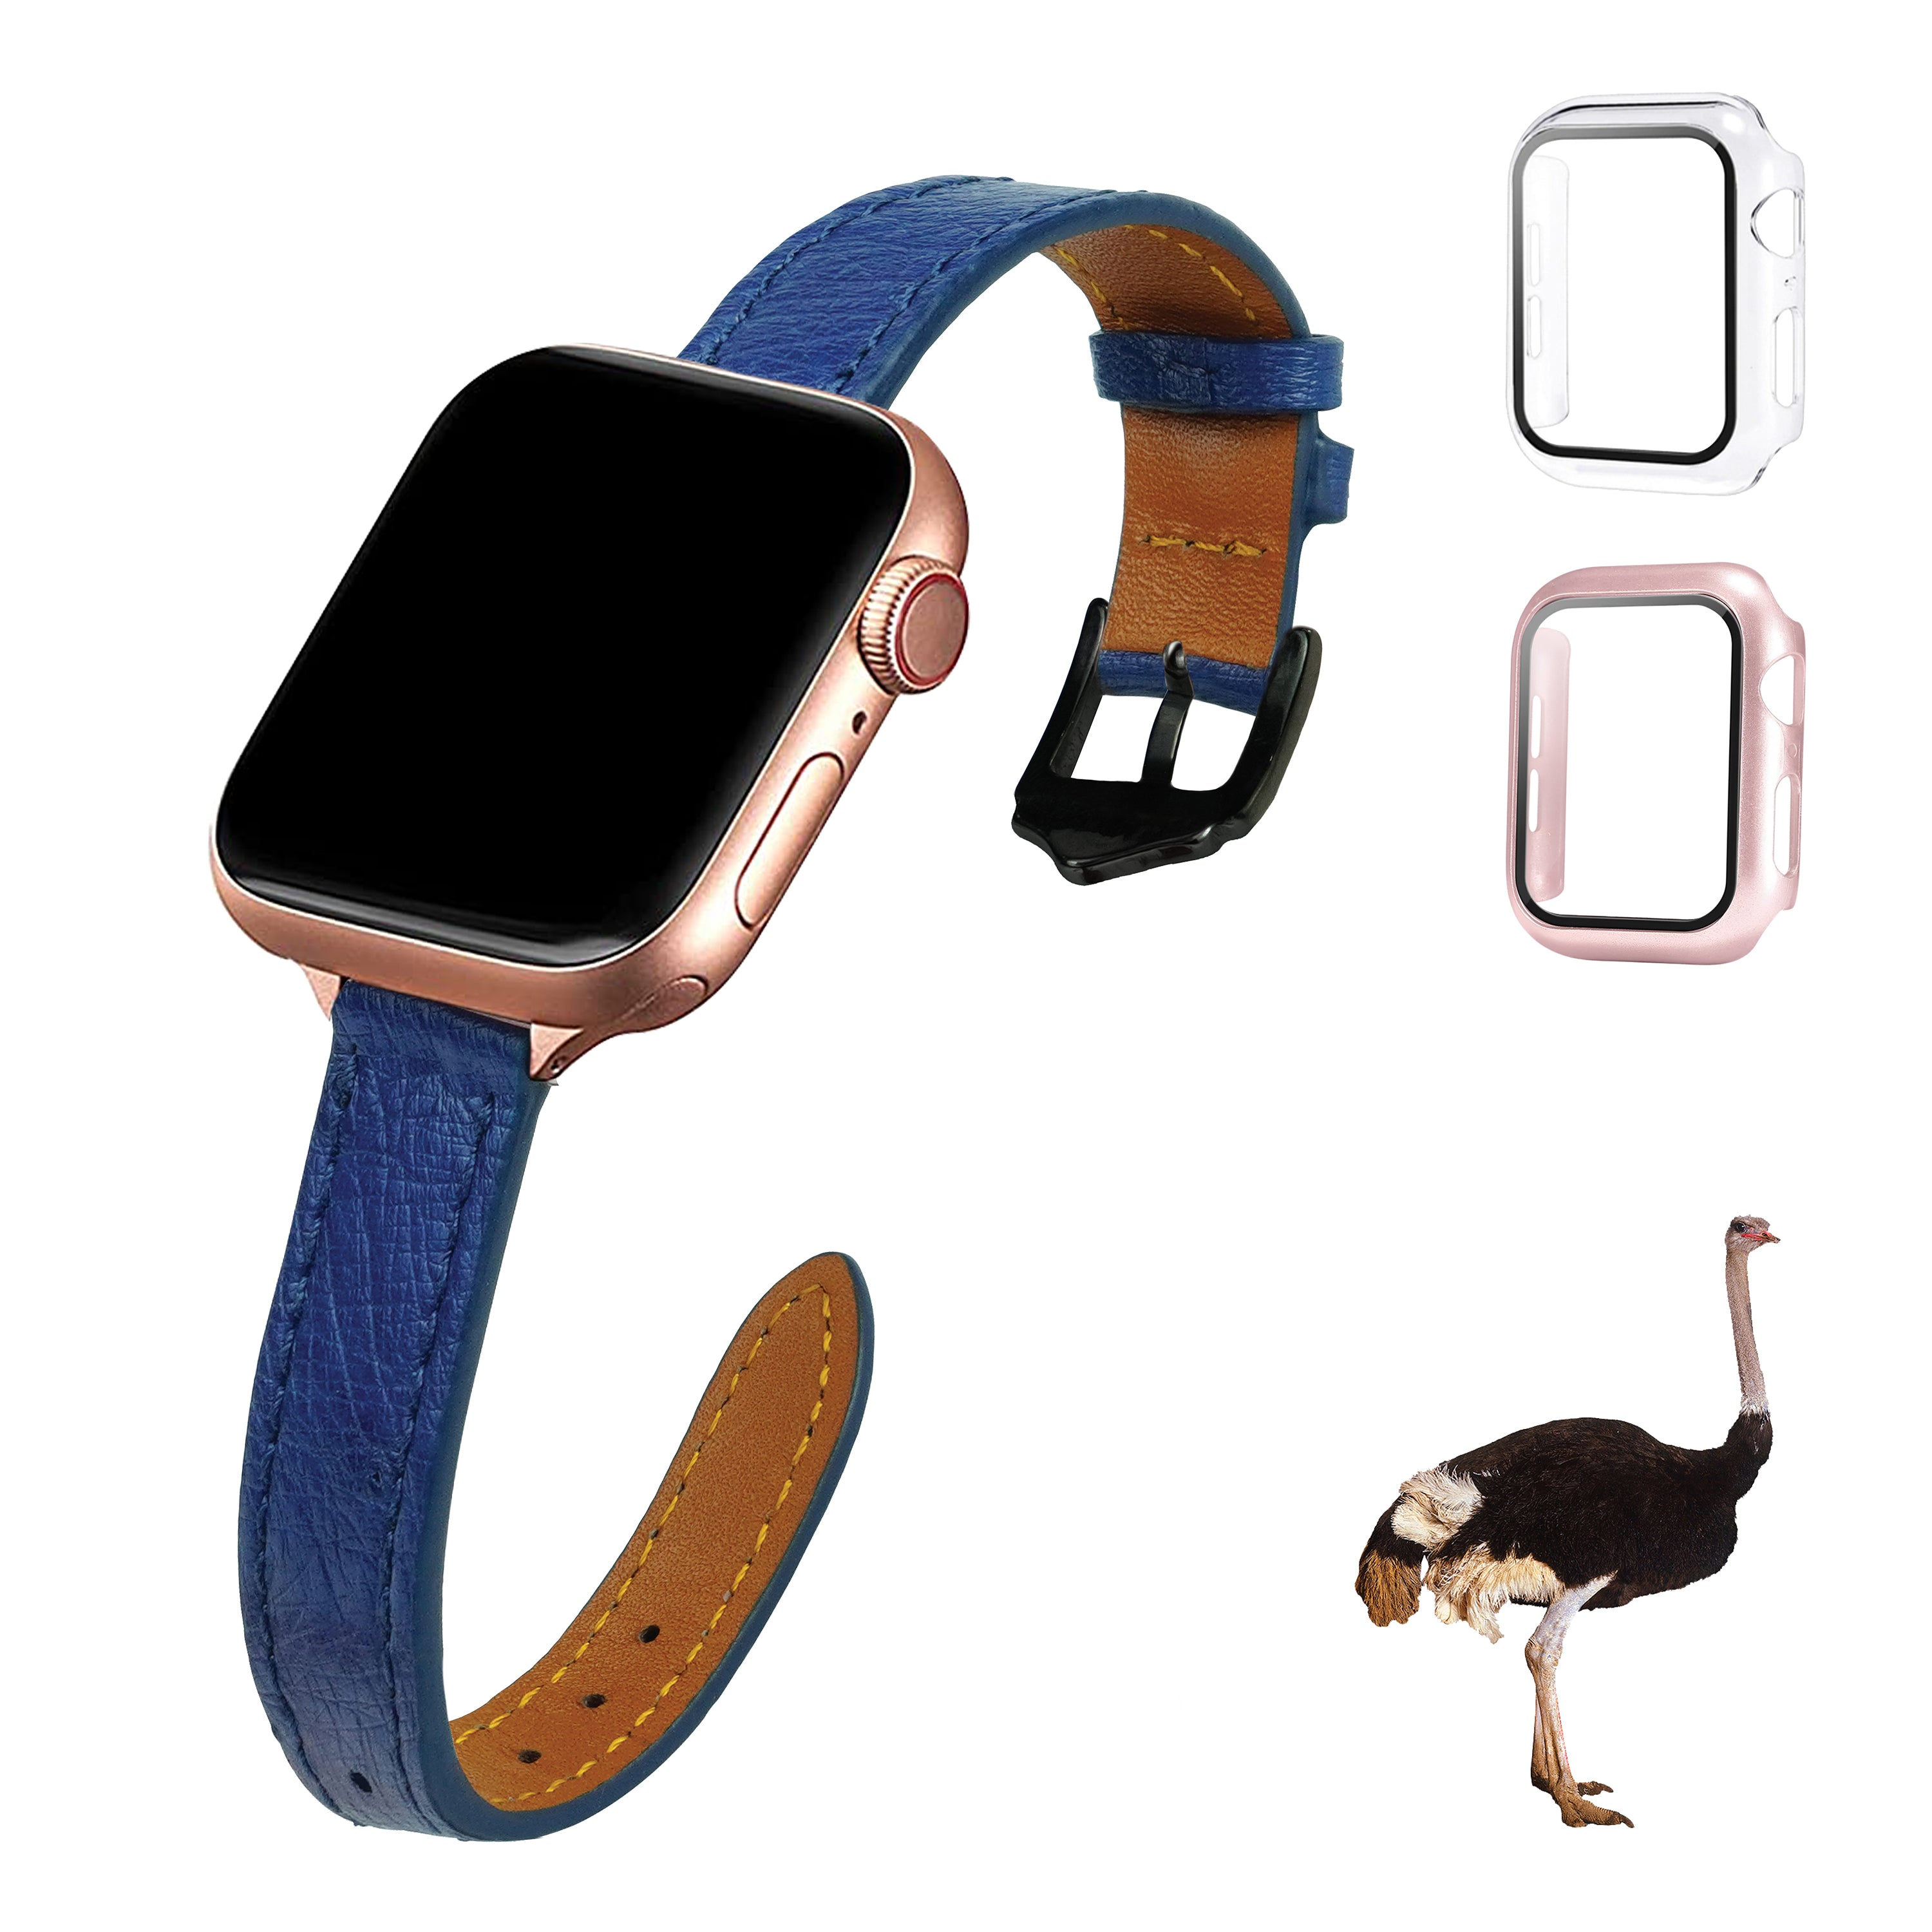 Blue Flat Ostrich Leather Band Compatible Apple Watch Iwatch 40mm Screen Protector Case Black Adapter Replacement Strap For Smartwatch Series 4 5 6 SE Leather Handmade AW-184B-W-40MM